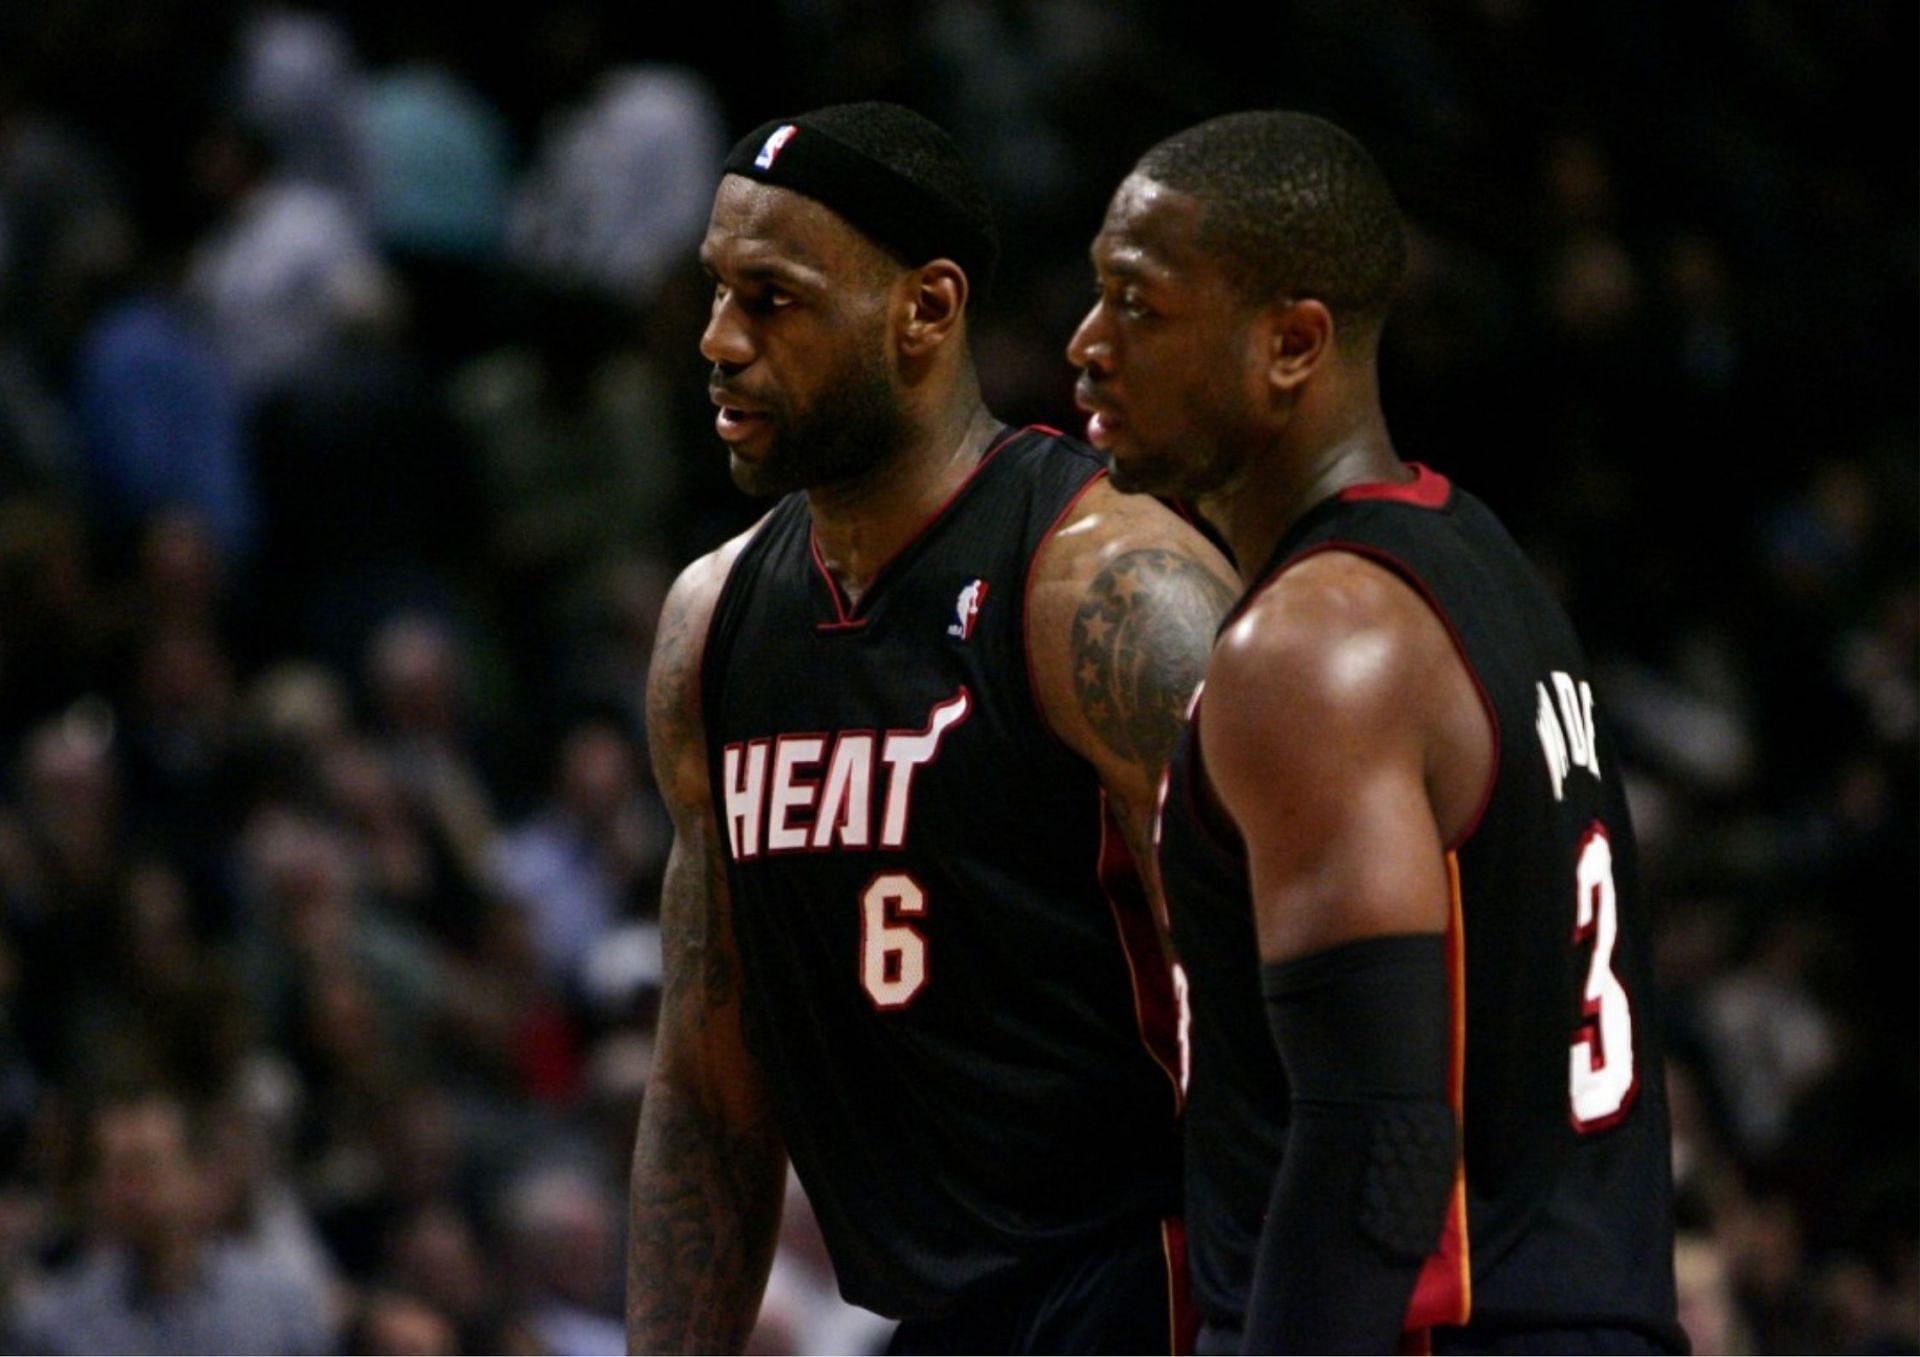 Dwyane Wade and LeBron James vacationed in the Bahamas after losing the 2011 championship to the Dallas Mavericks.